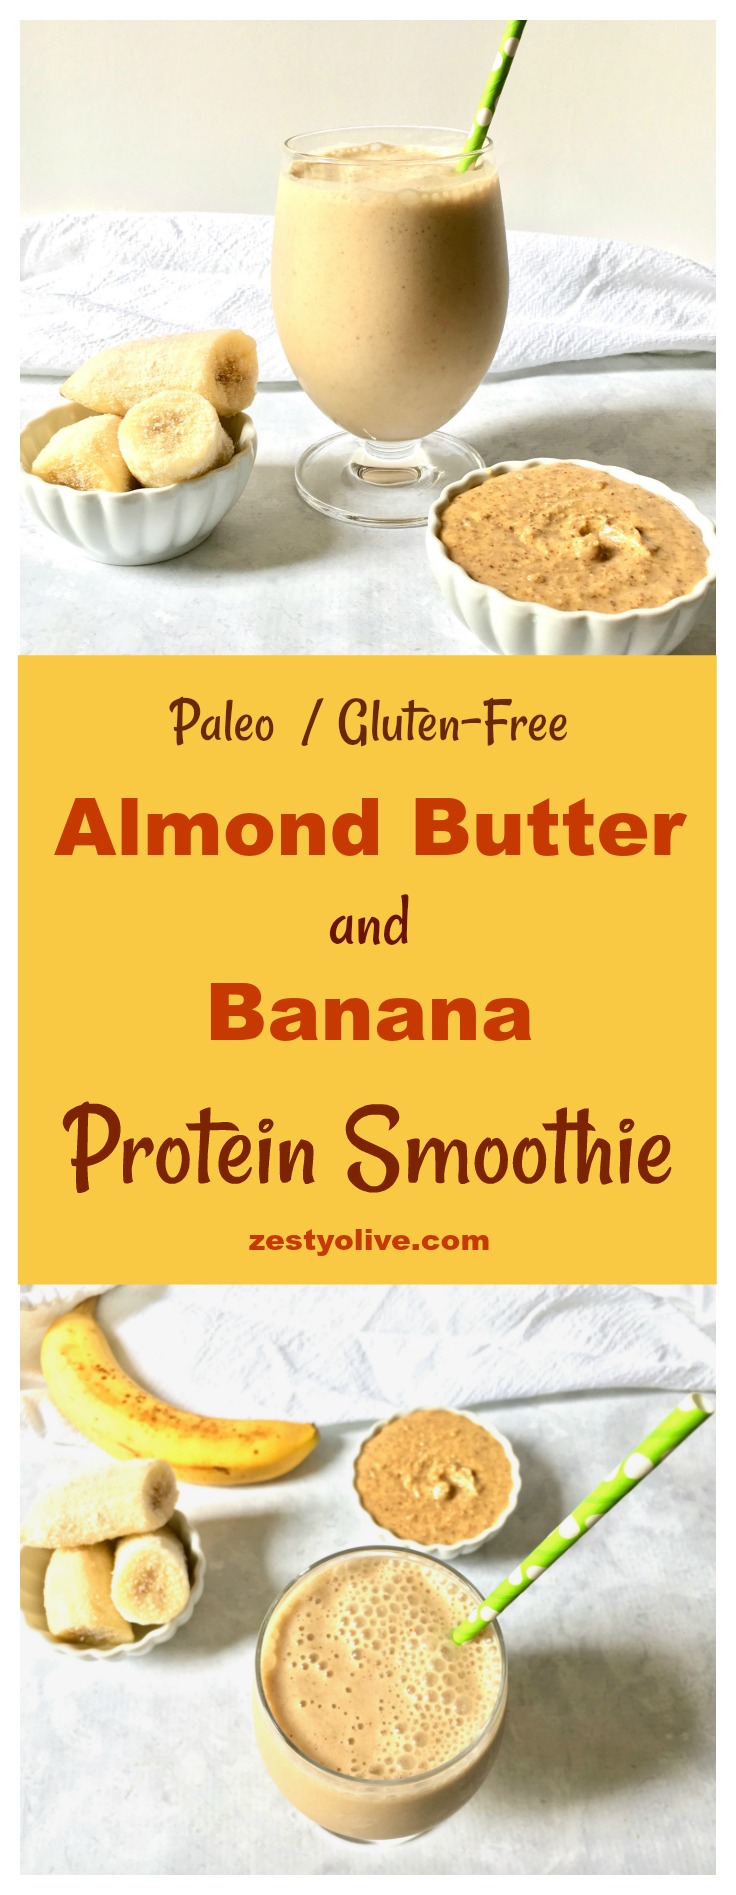 This Almond Butter and Banana Protein Smoothie is healthy, paleo and gluten-free.